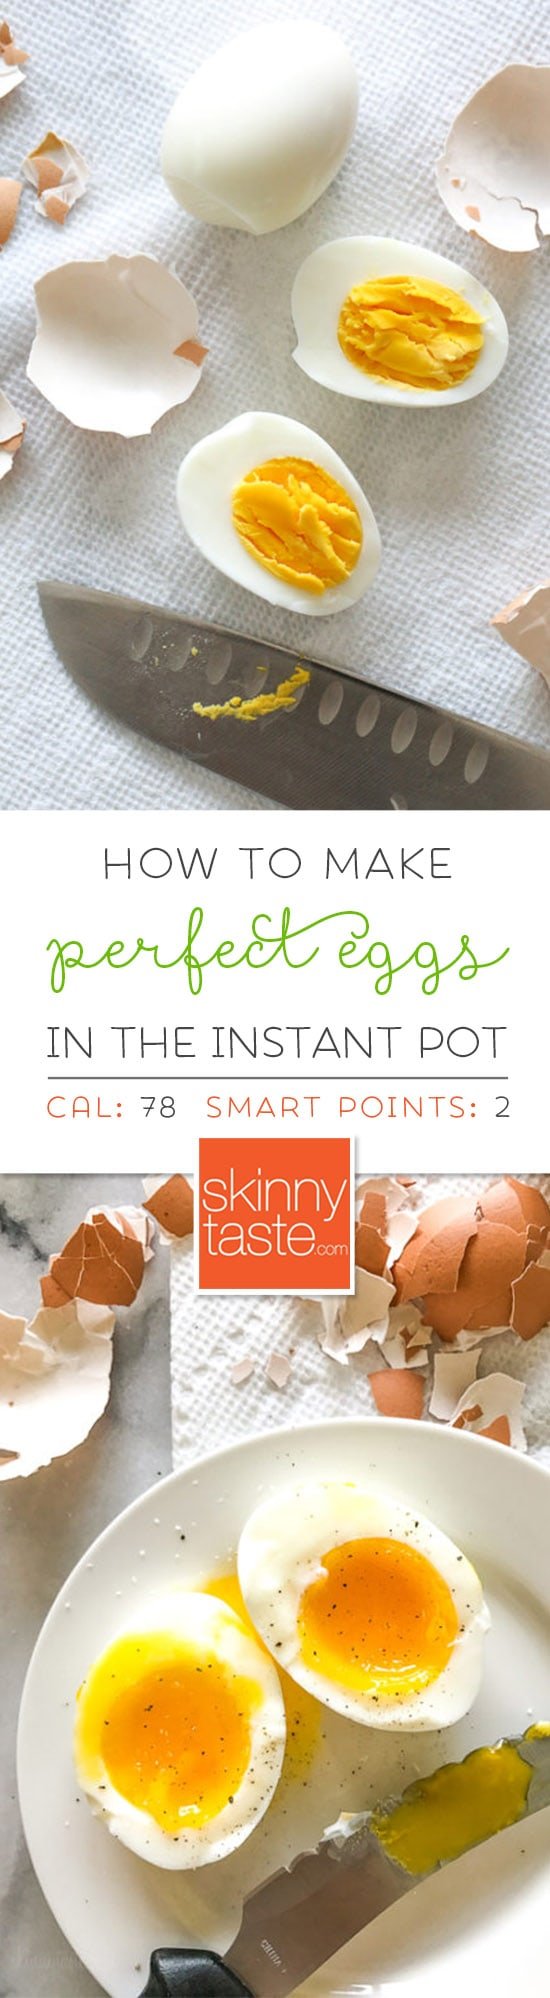 How to Make Perfect Eggs in the Instant Pot. This simple formula will give you perfect, easy-to-peel eggs either hard boiled or soft boiled.